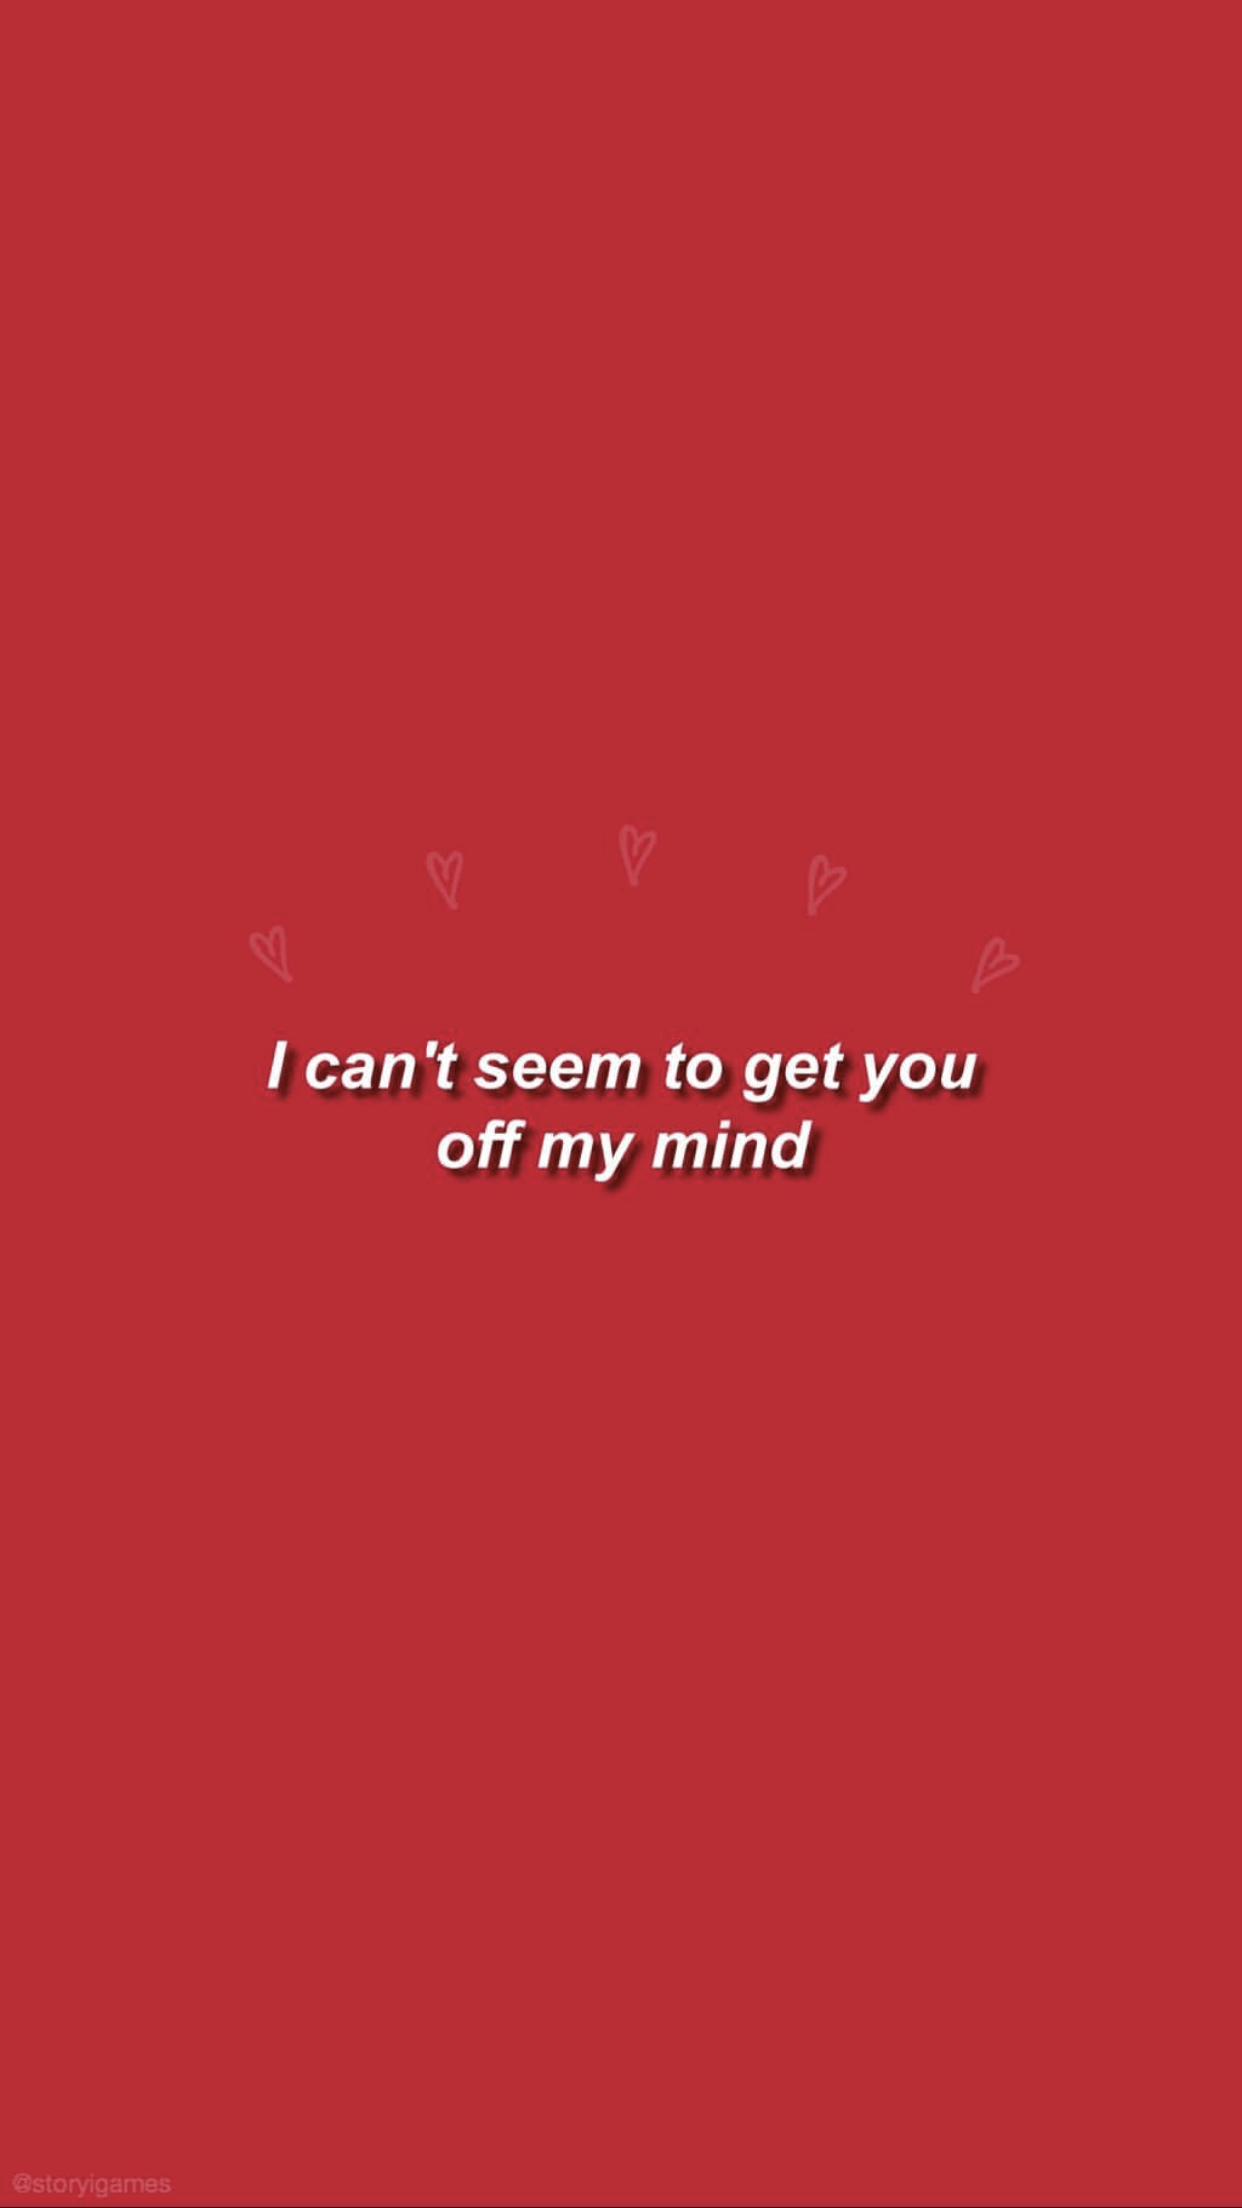 I can't seem to get you people off my mind. Wallpaper quotes